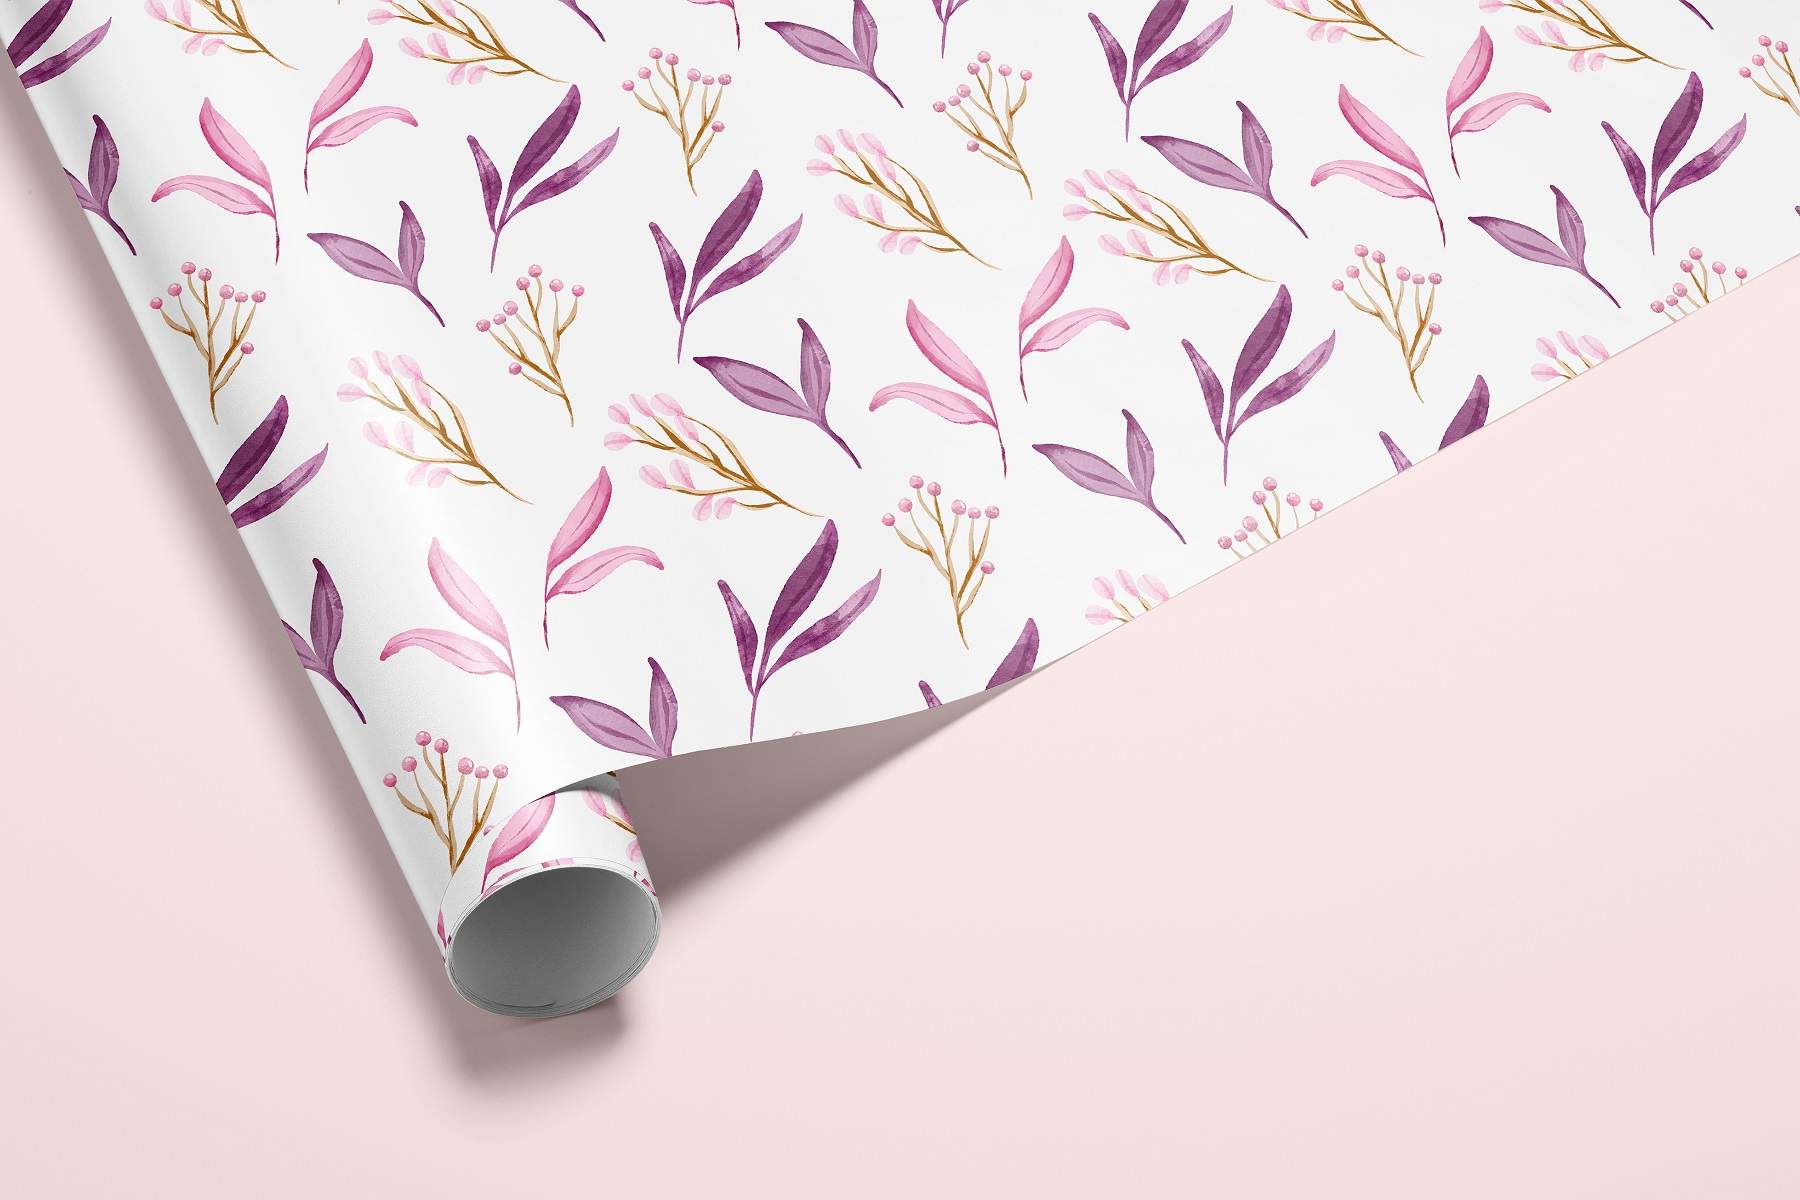 Pink and purple floral pattern on a white background.